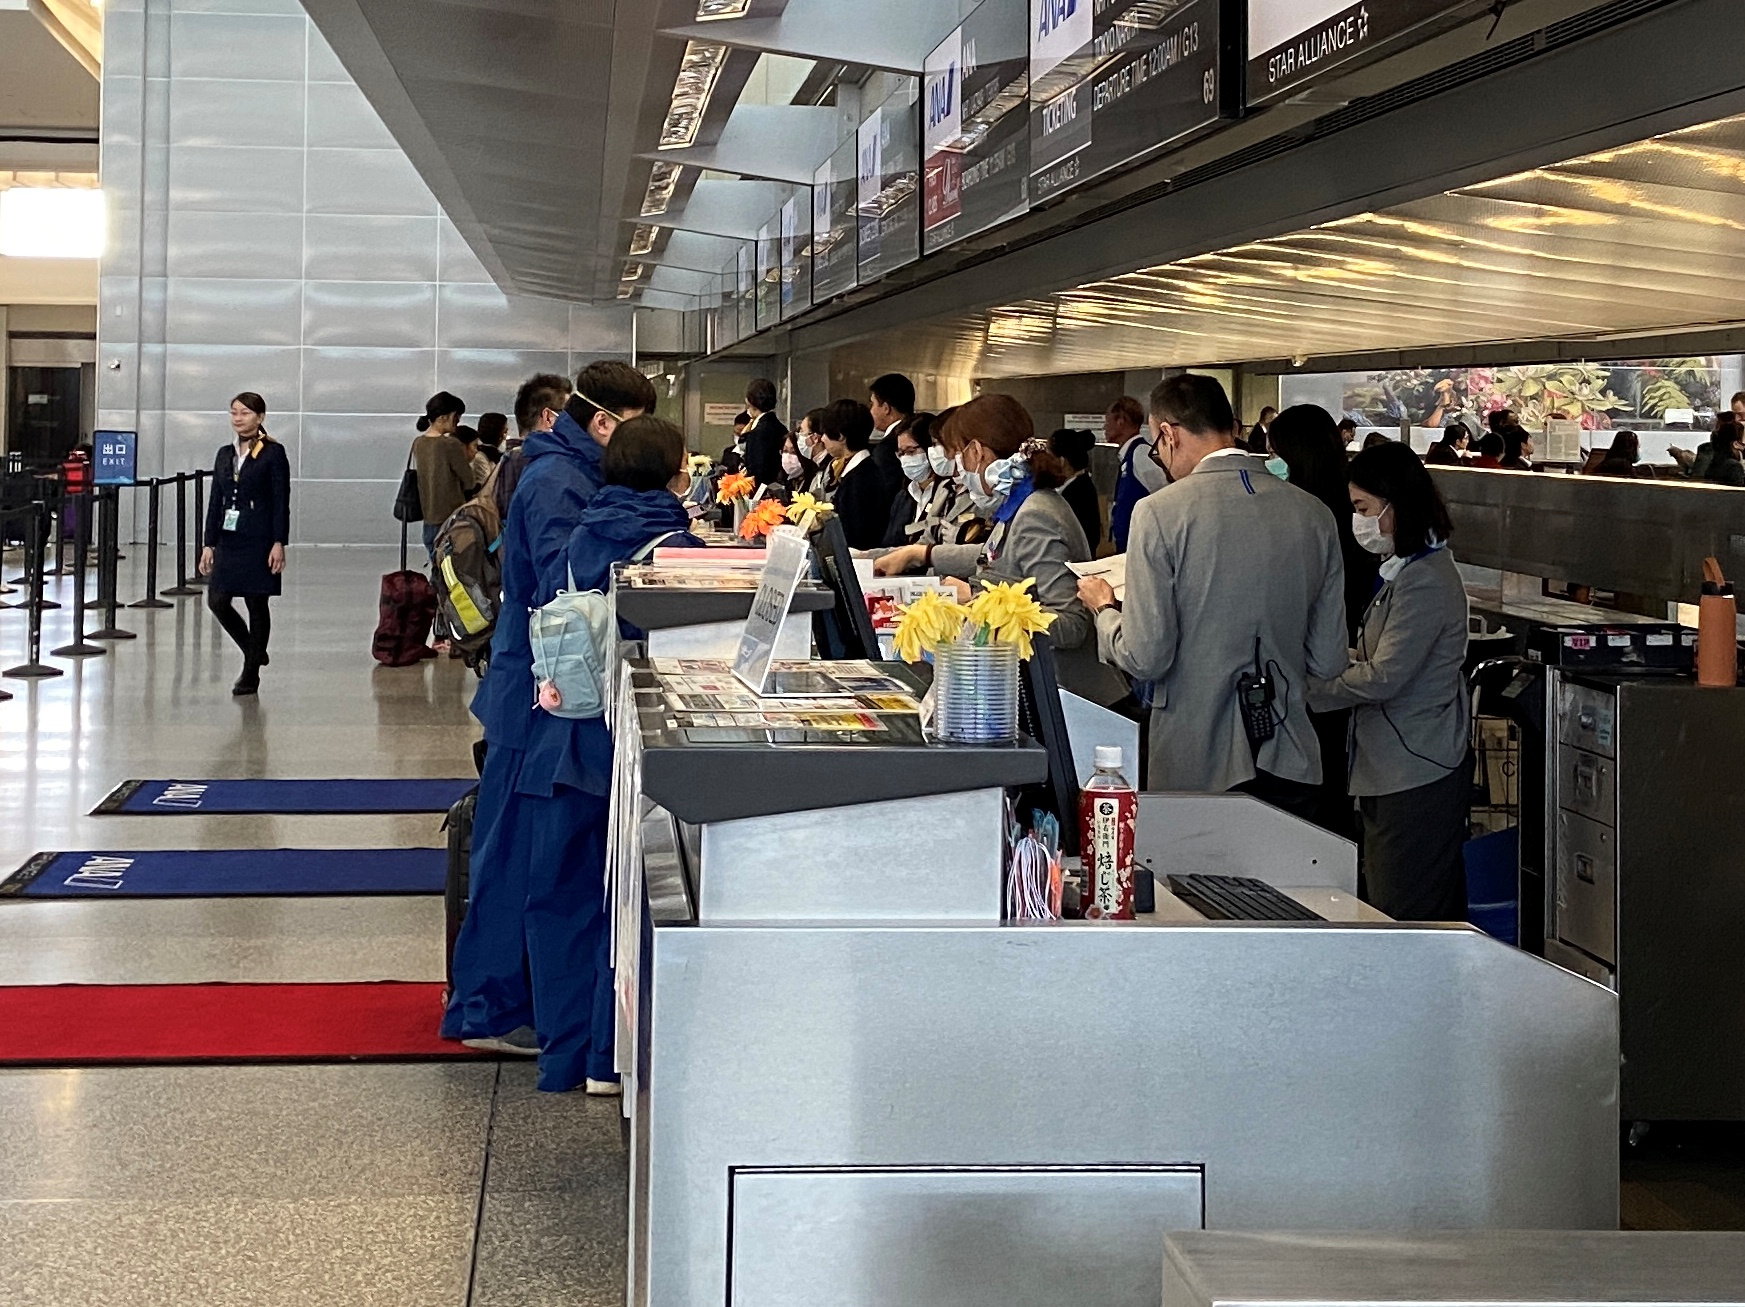 Workers at the ticket desk for Japanese airline All Nippon Airways assist travellers at the departures hall of the San Francisco International Airport, during coronavirus disease (COVID-19) outbreak, in San Francisco